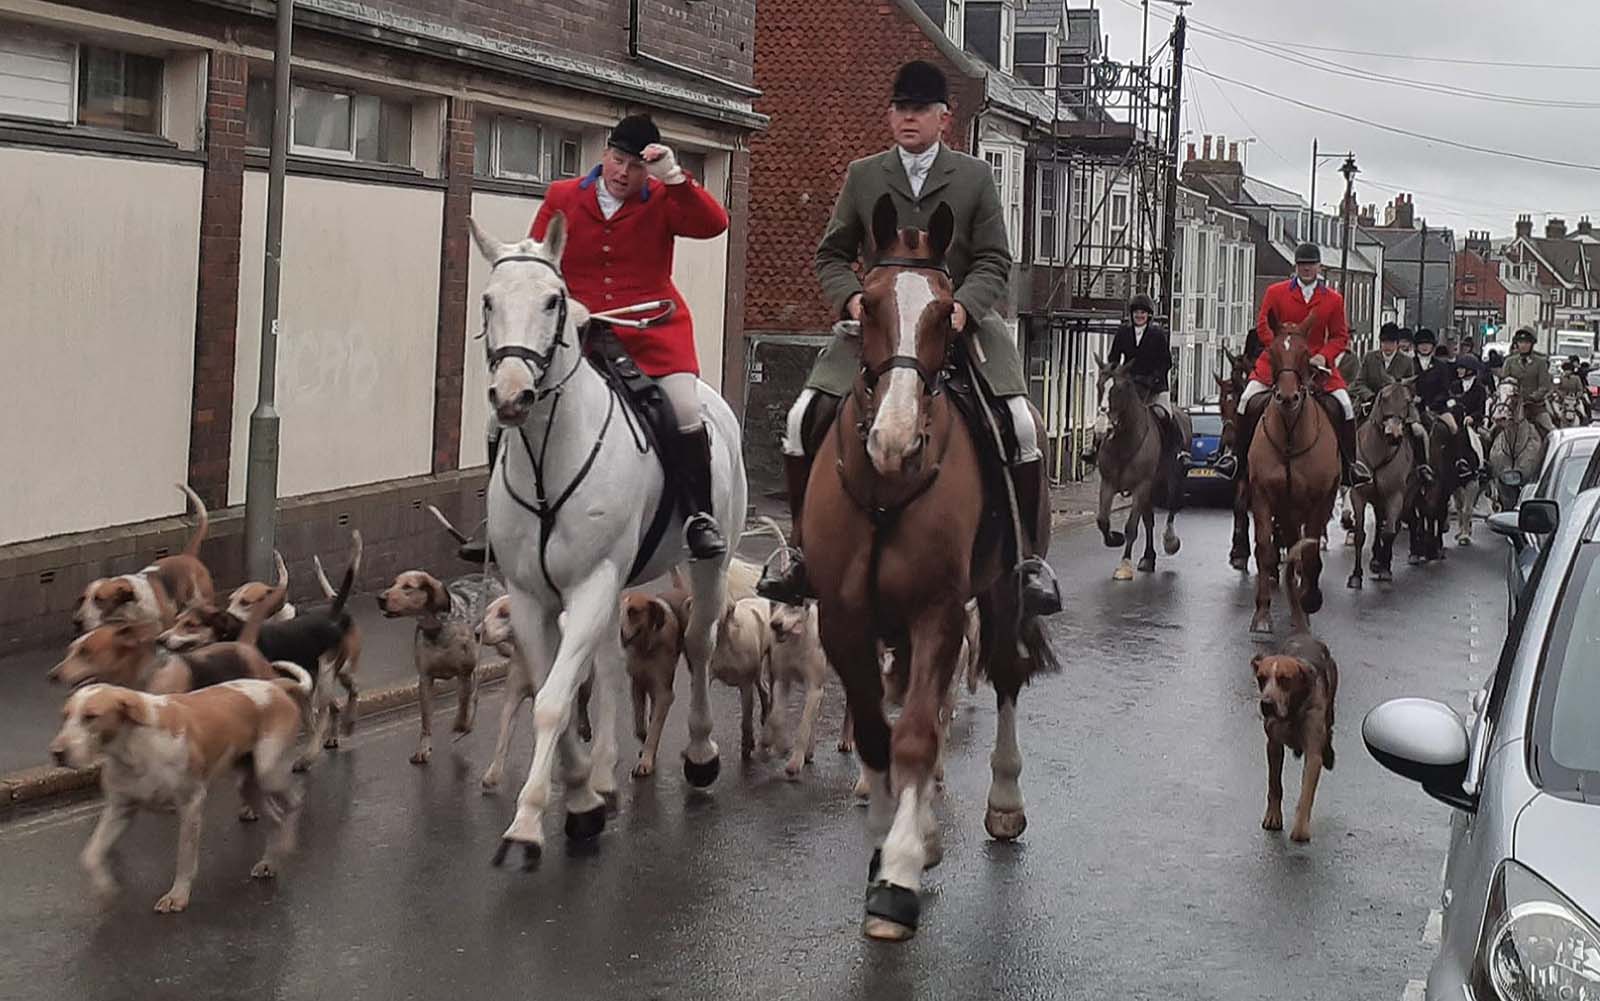 A picture of a boxing day trail hut going through a street, there are numerous people on horseback and hounds.